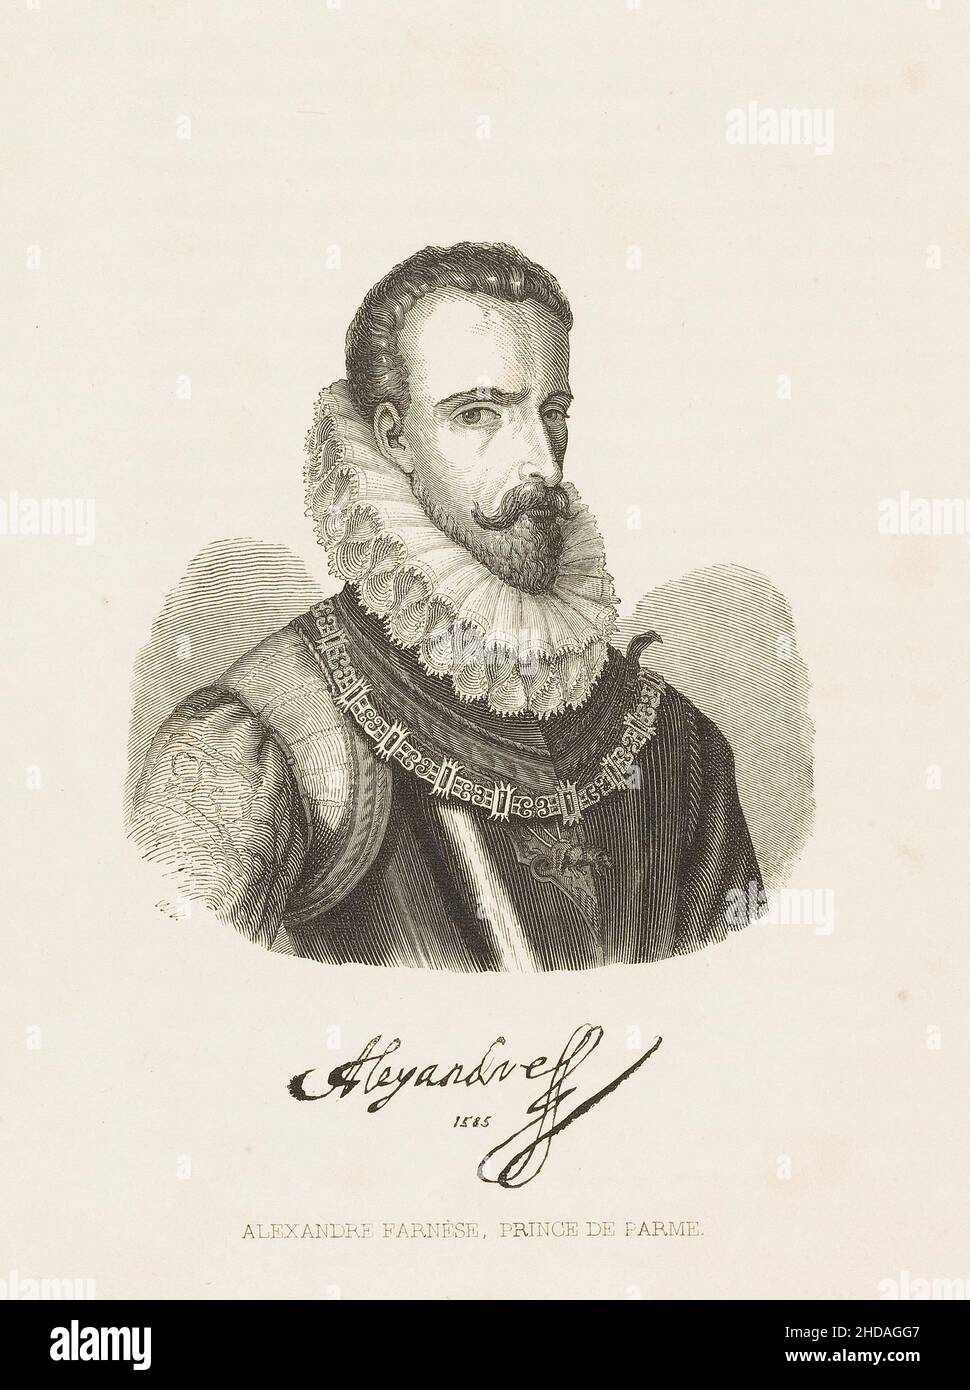 Engraving portrait of Alexander Farnese, Duke of Parma. Alexander Farnese (1545 – 1592) was an Italian noble and condottiero and later a general of th Stock Photo